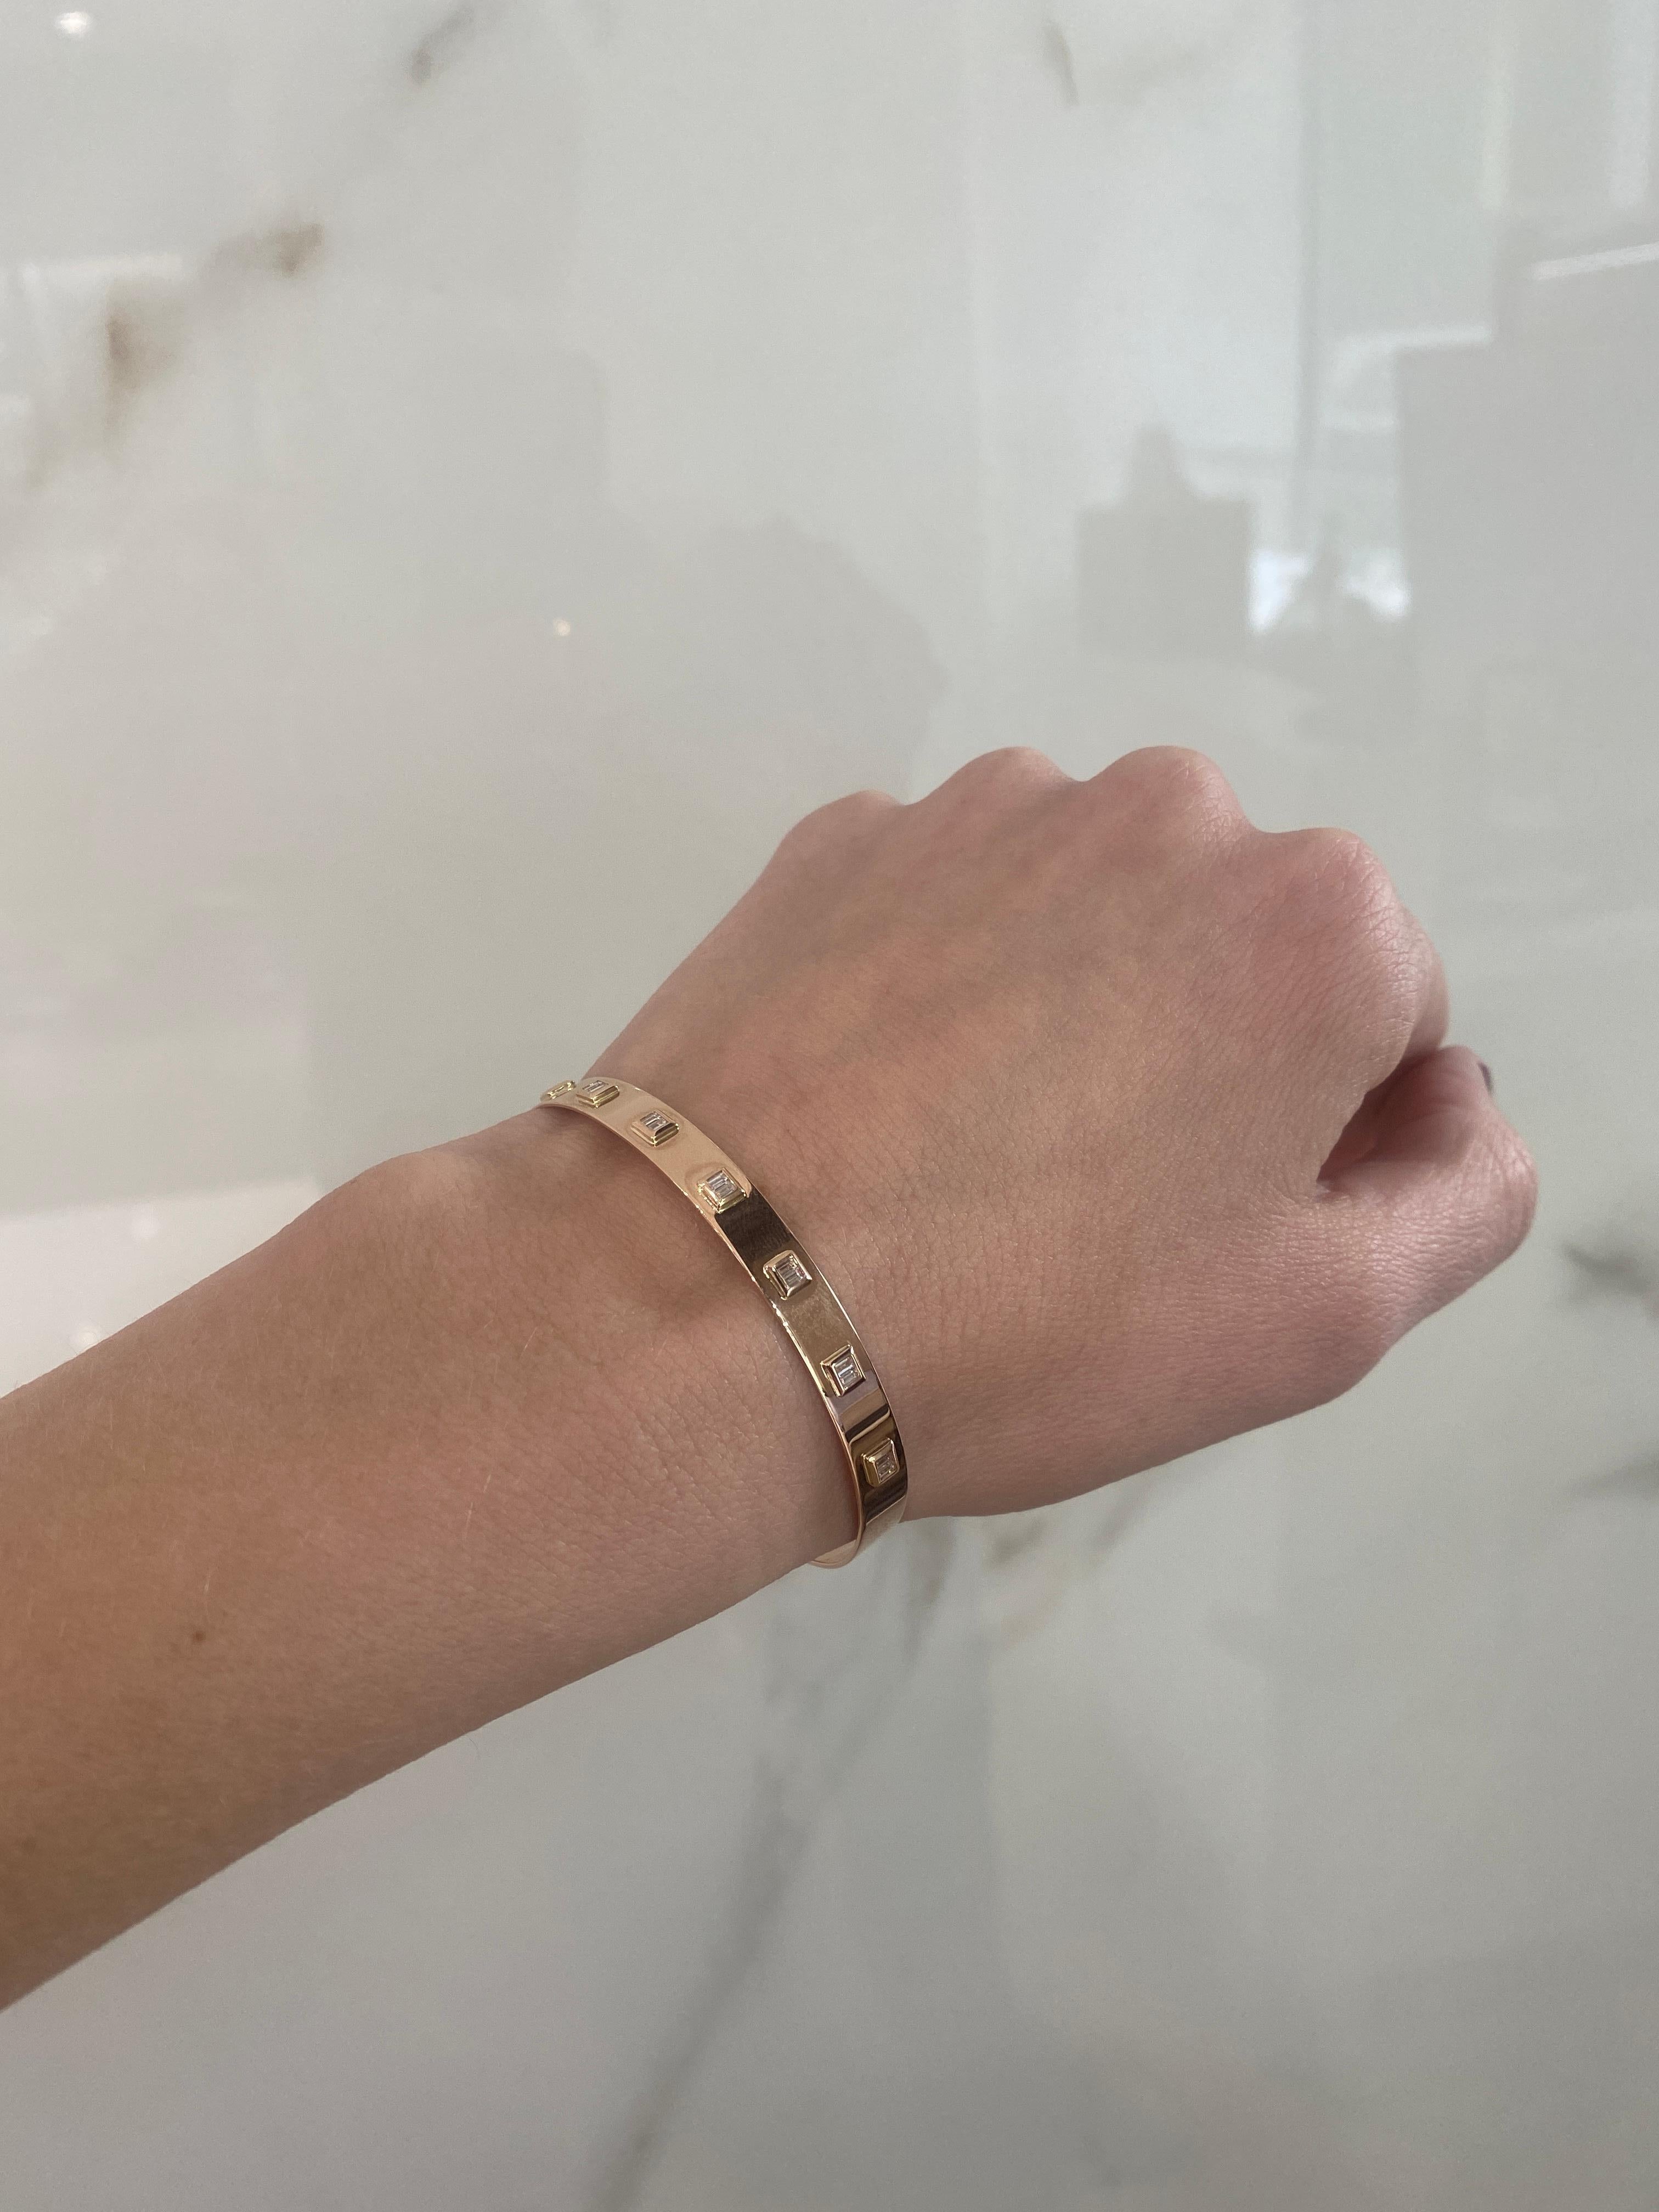 A modern bangle featuring 0.24 carat total weight in 14 bezel set diamonds, SI2-I1 j-k, set in 14 karat rose gold. This bracelet has an adjustable closure and can fit up to 6.25